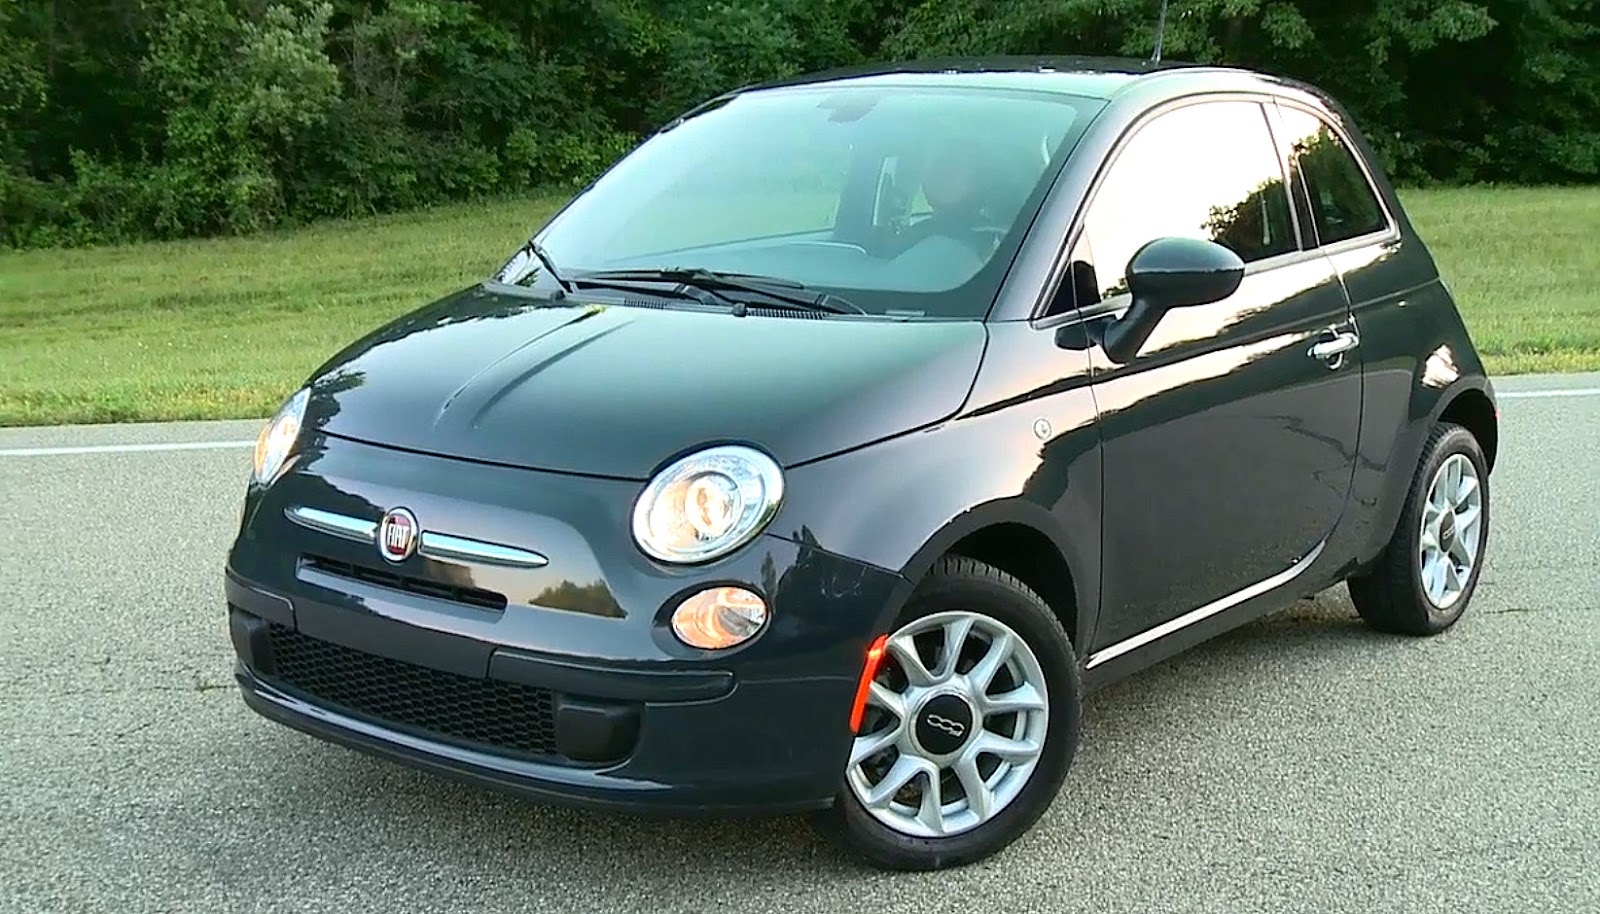 Fiat 500 USA: 2017 Fiat 500 and Abarth Model Changes